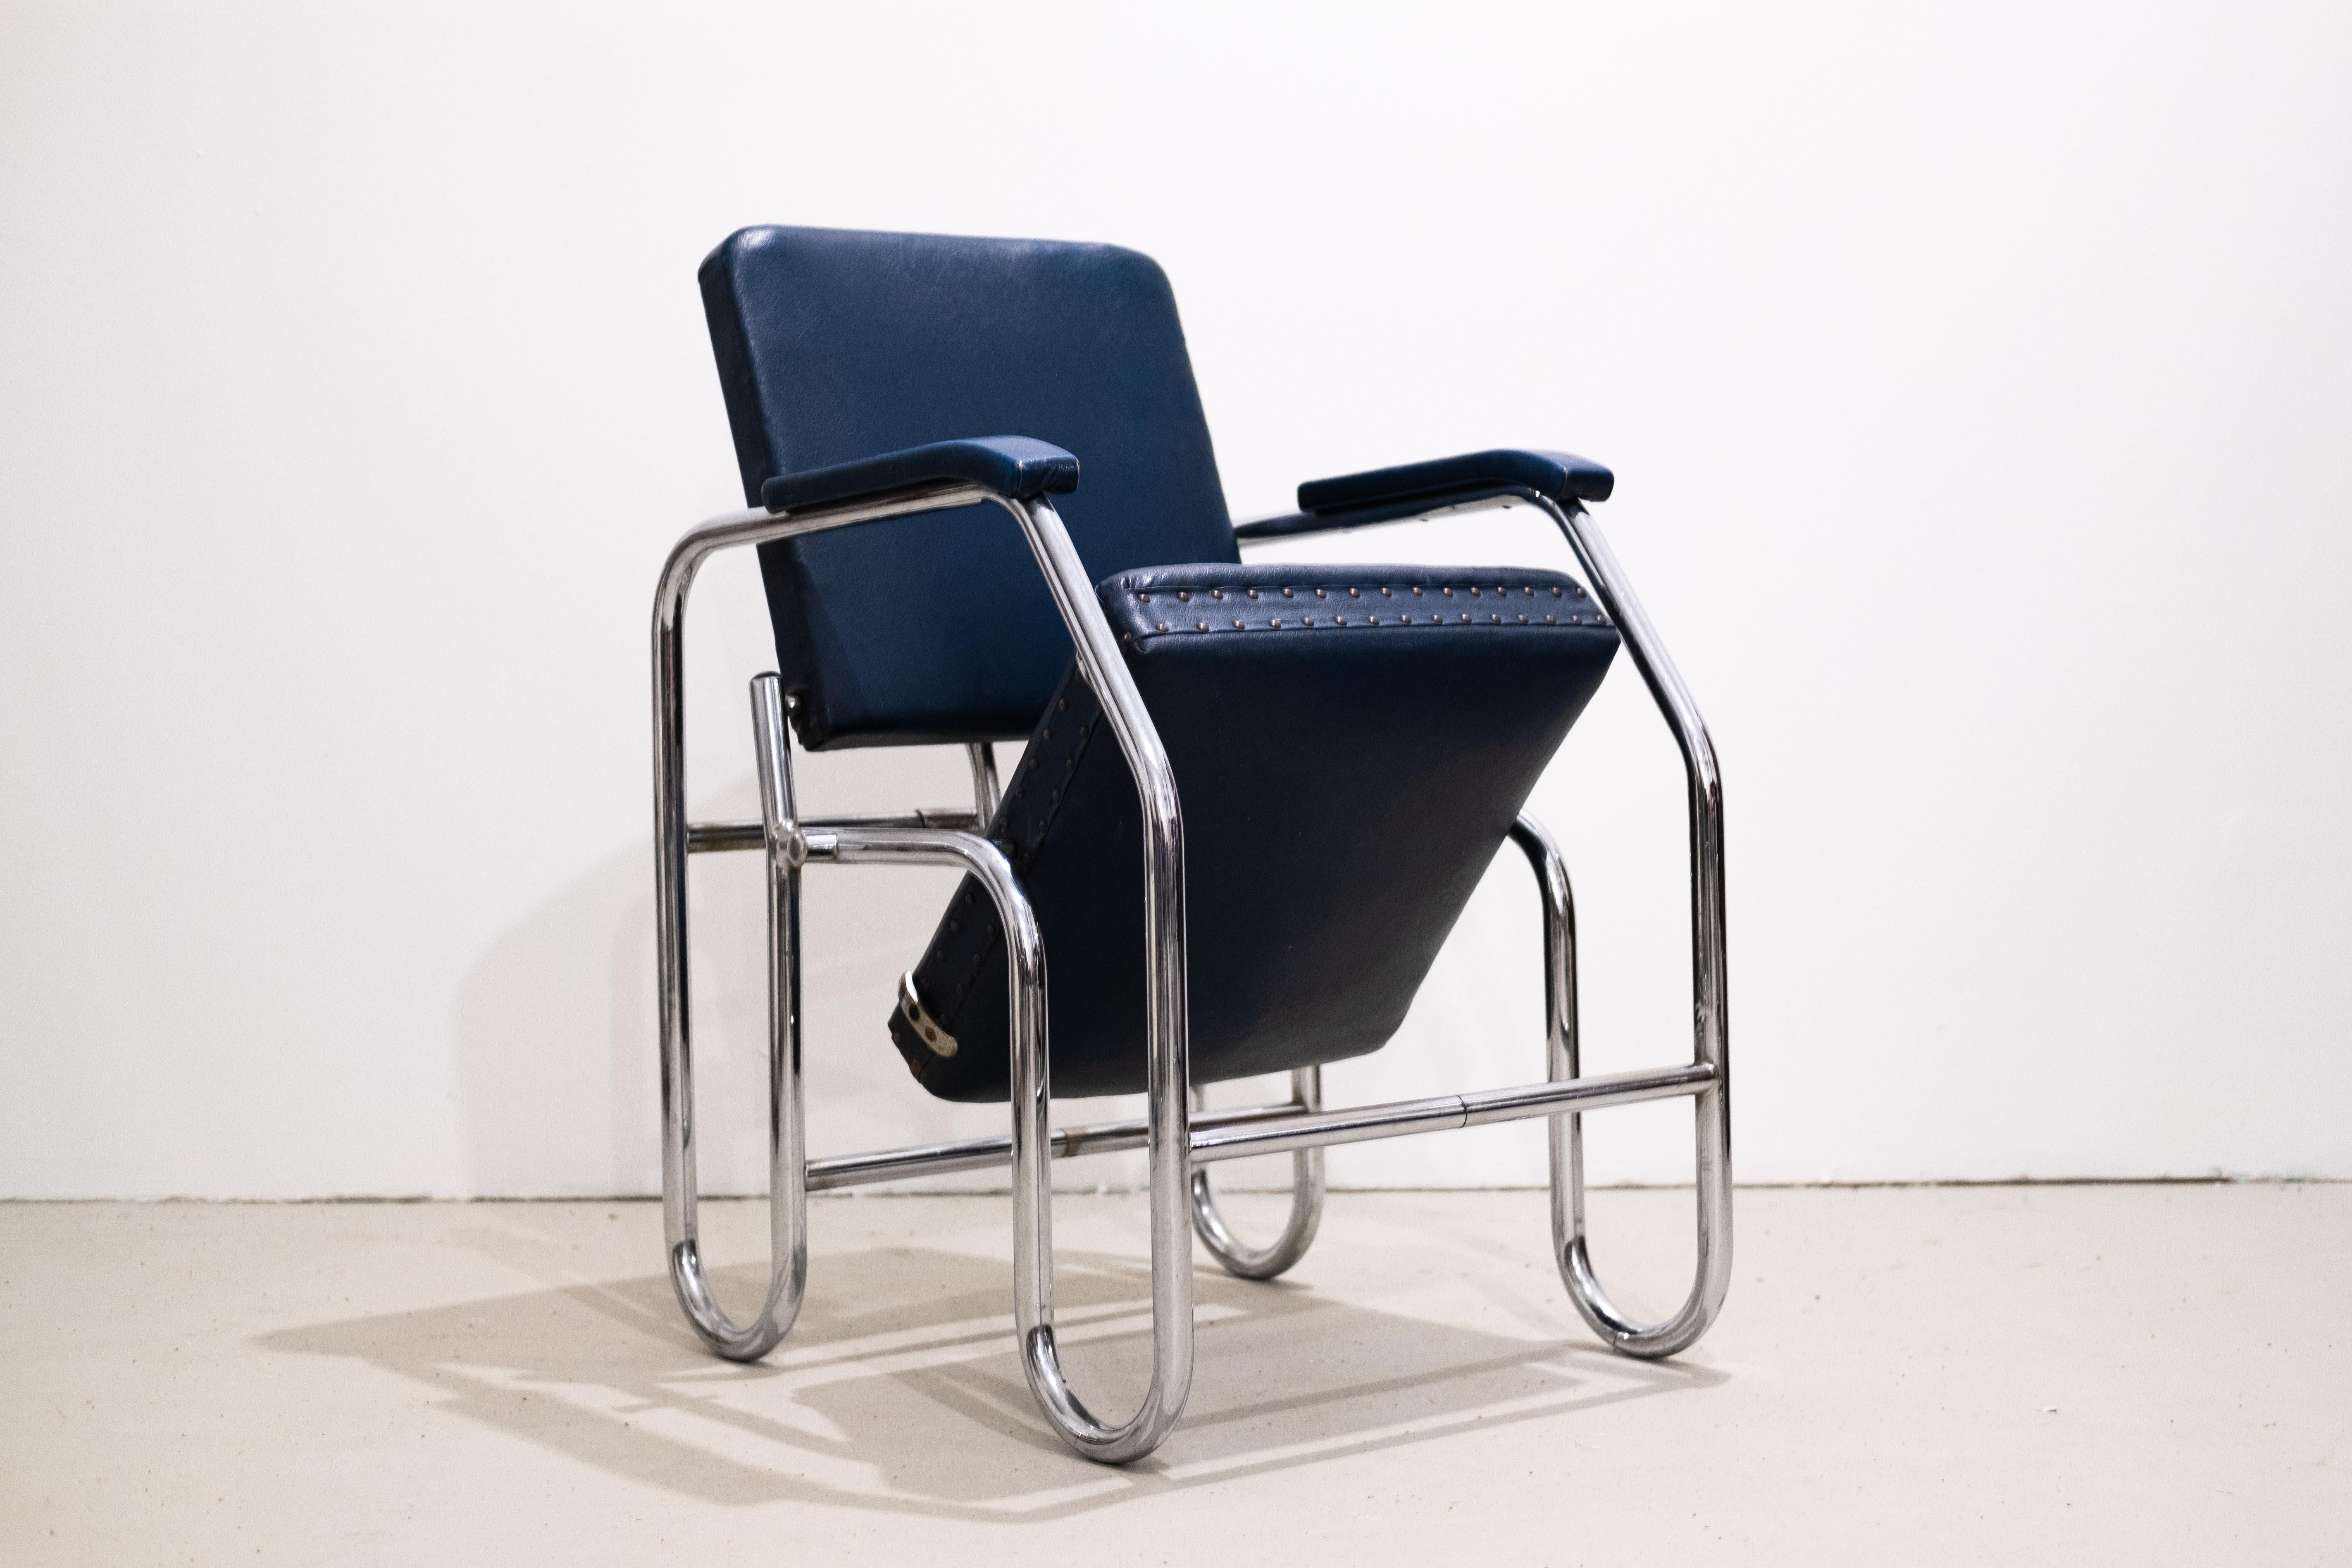 Blue Bauhaus Steelpipe Armchair with rotatable Seat (Amsterdam, 1930) For Sale 1